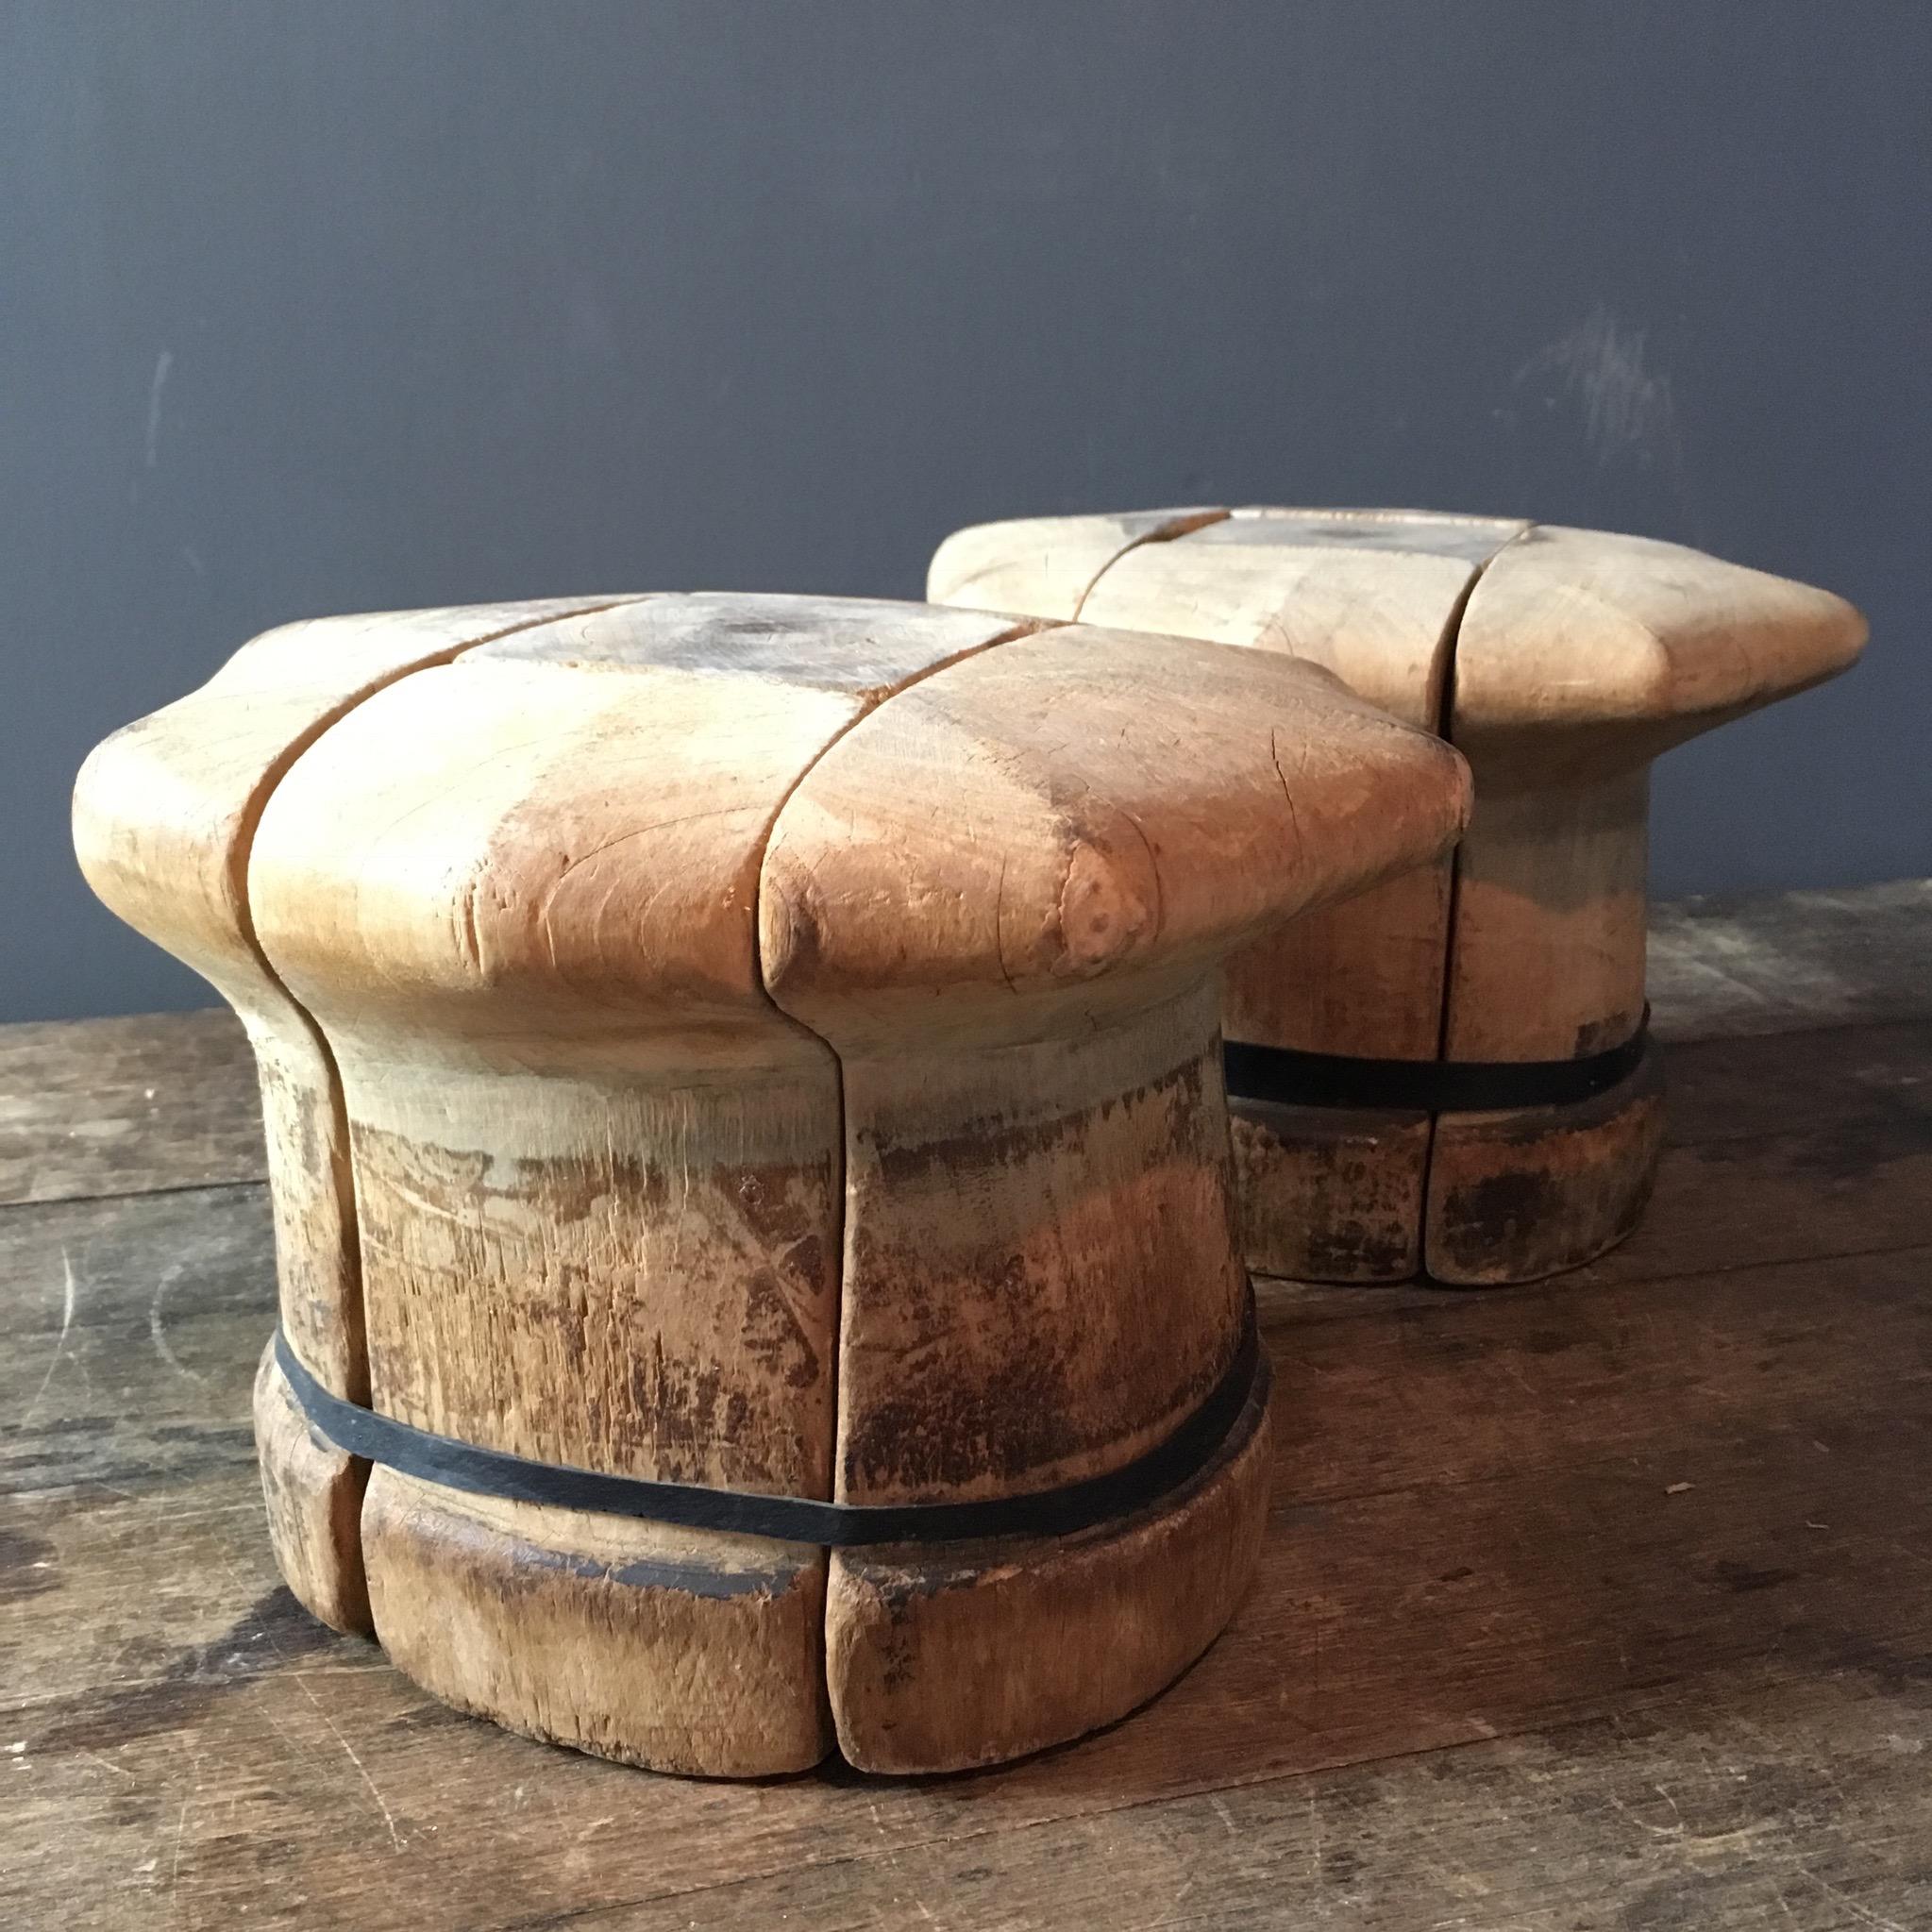 Vintage French wooden hat blocks

Puzzle hat blocks that come apart to release the block once hat is moulded

The blocks are original french pieces

They have a rubber neck band to hold them together

Dimensions of each block 

26 cm